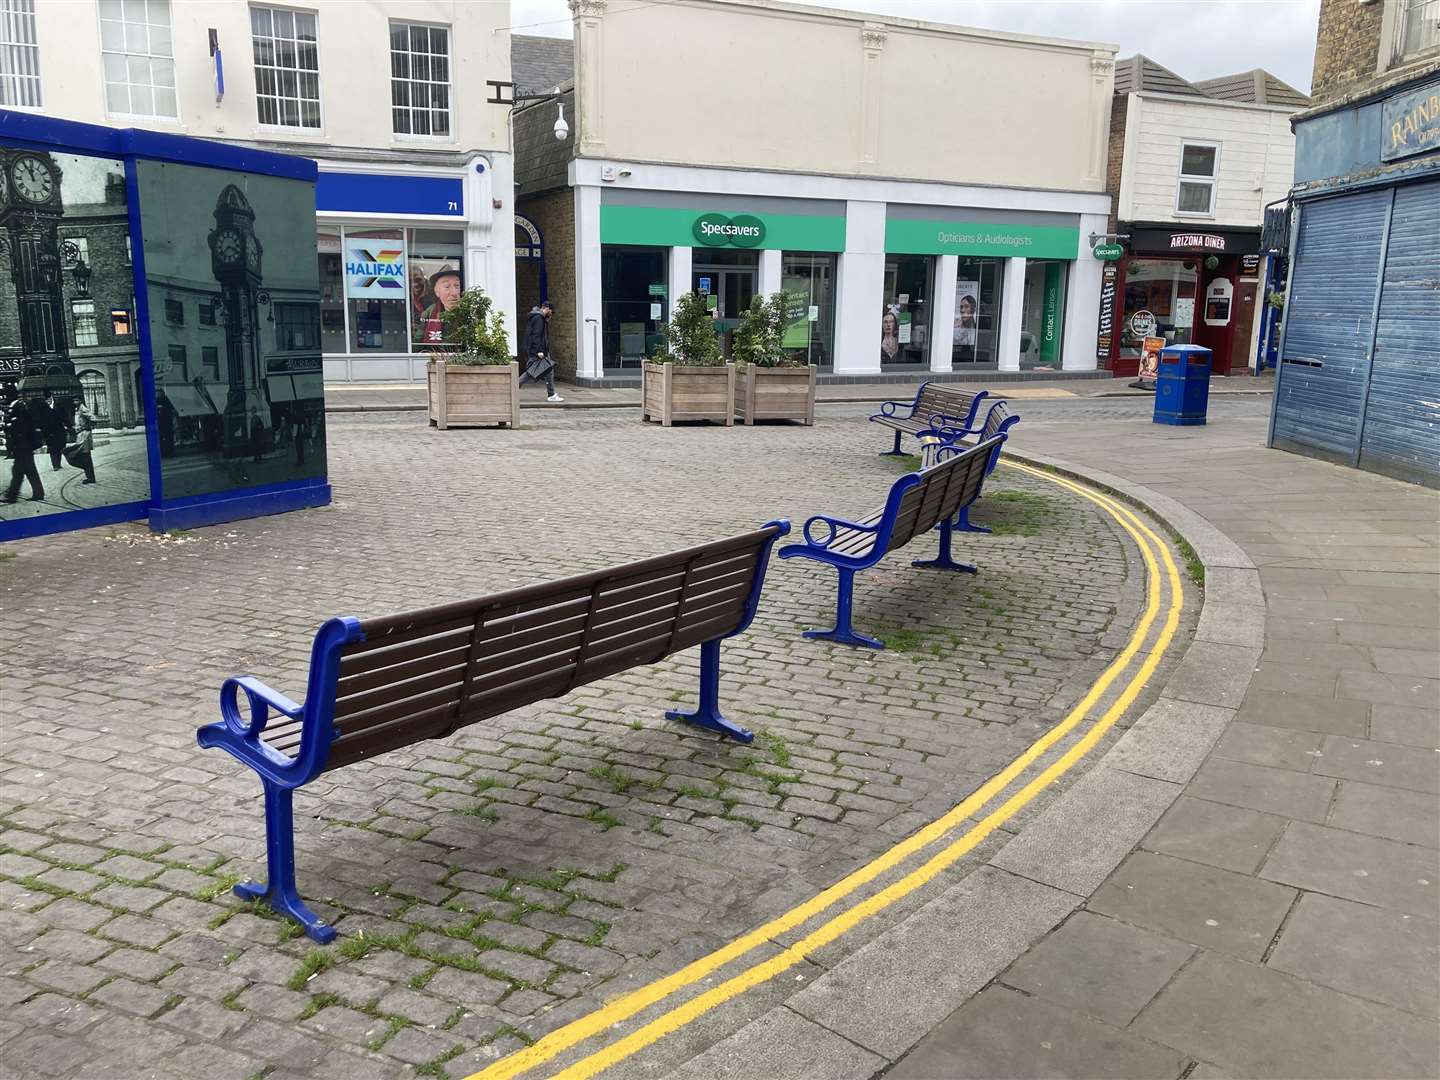 Double yellow lines painted around benches in the pedestrianised area of Sheerness town centre by the clock tower